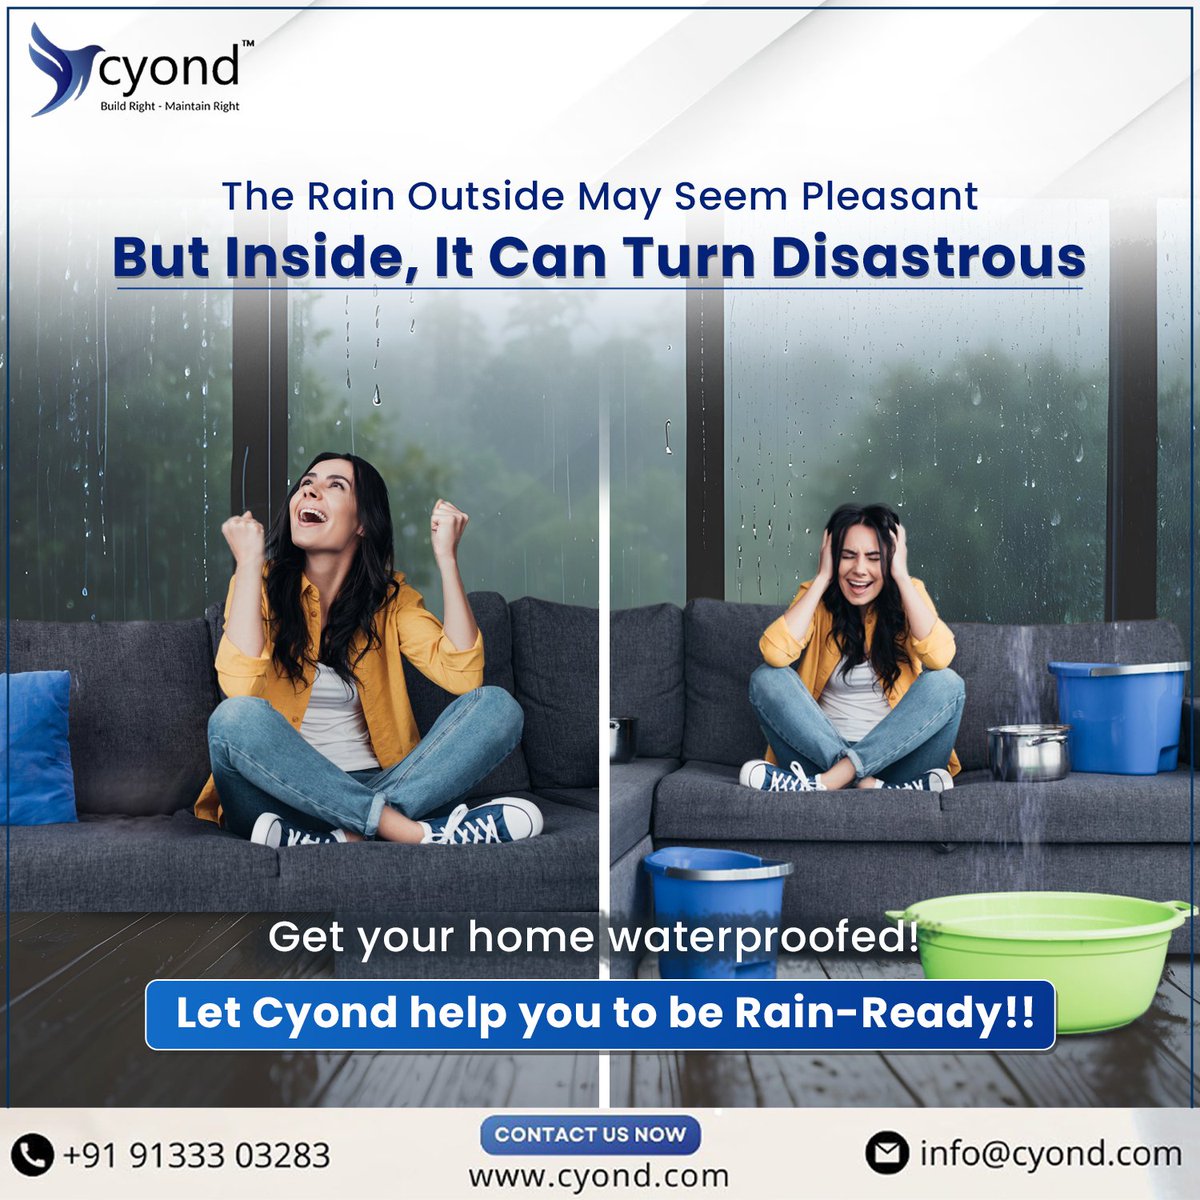 Don't let rainy days dampen your spirits or your home! Shield your sanctuary with Cyond's expert waterproofing services and enjoy peace of mind, whatever the weather. 

#cyond #protectyourhome #propertymaintenance #rain #homeinspectionservices  #inspectionservices  #sm4dm